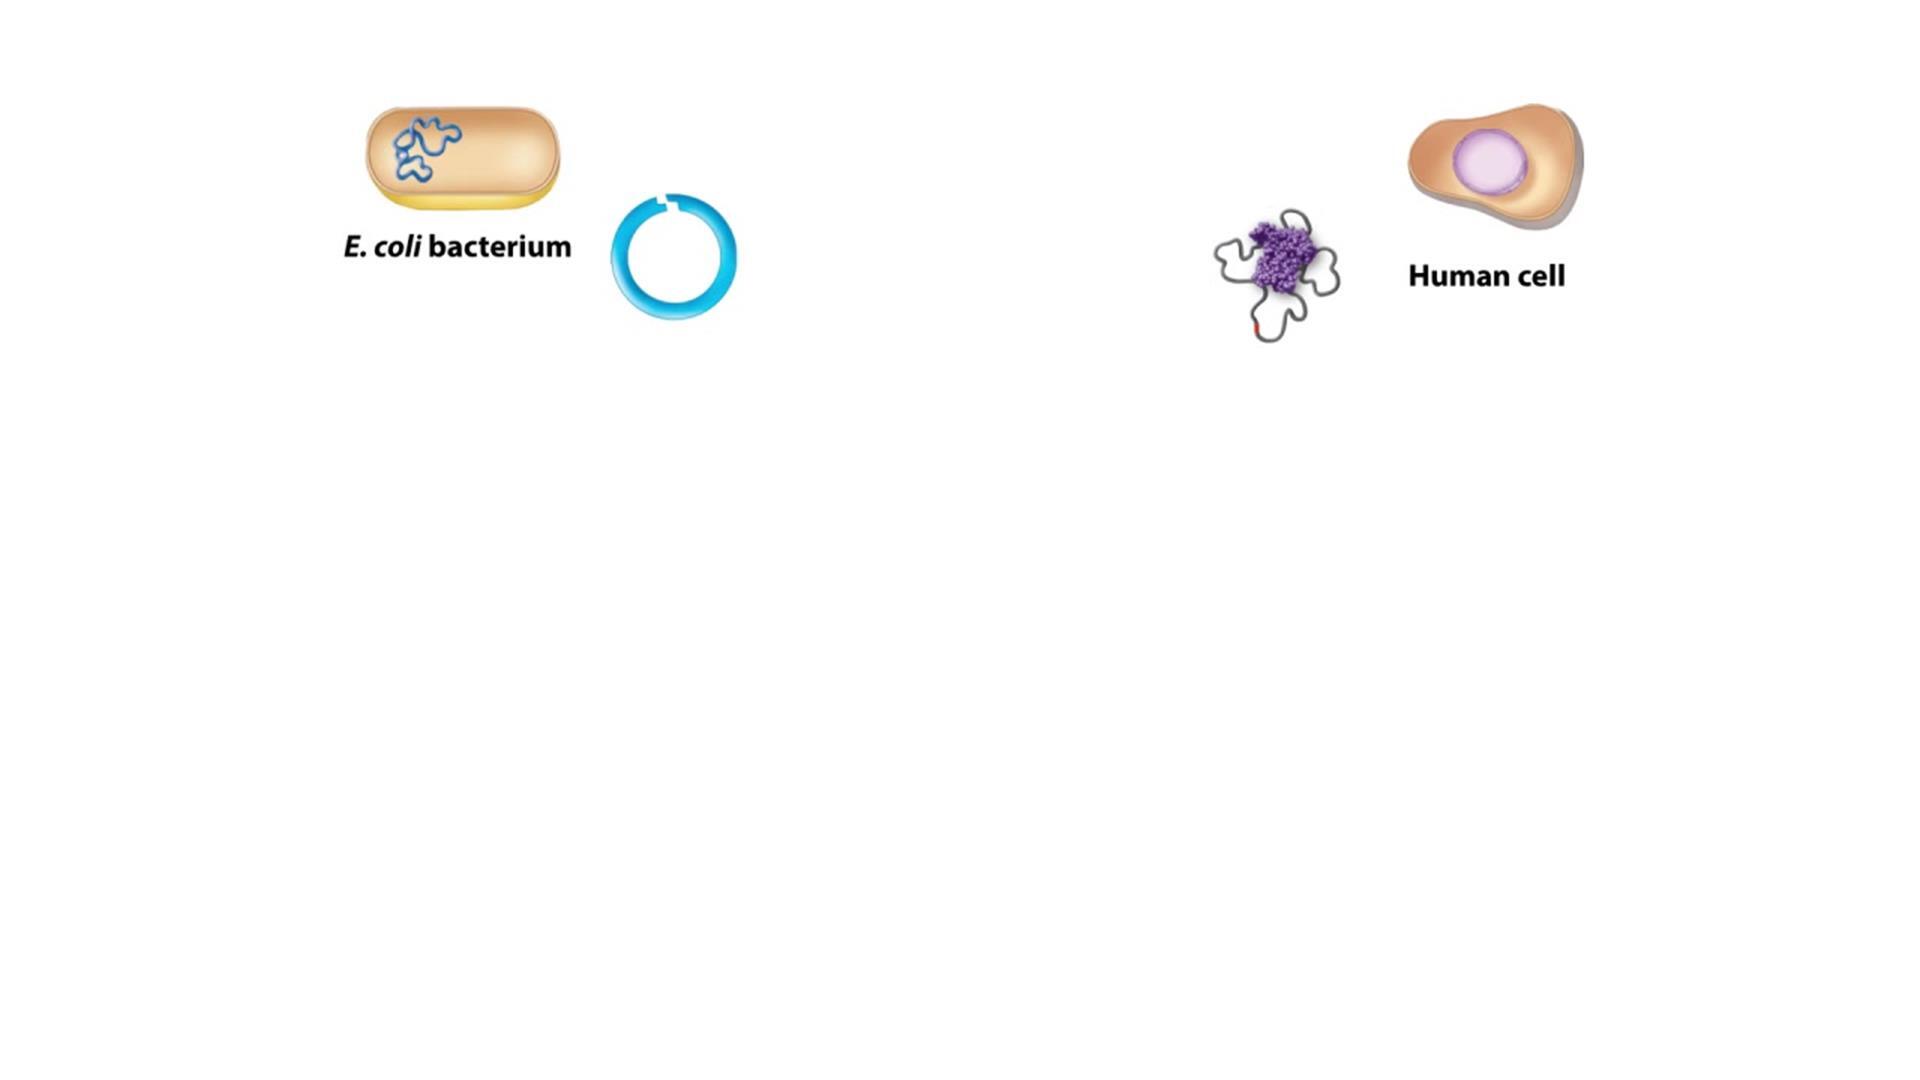 Animation: Creating Recombinant DNA | Pearson+ Channels